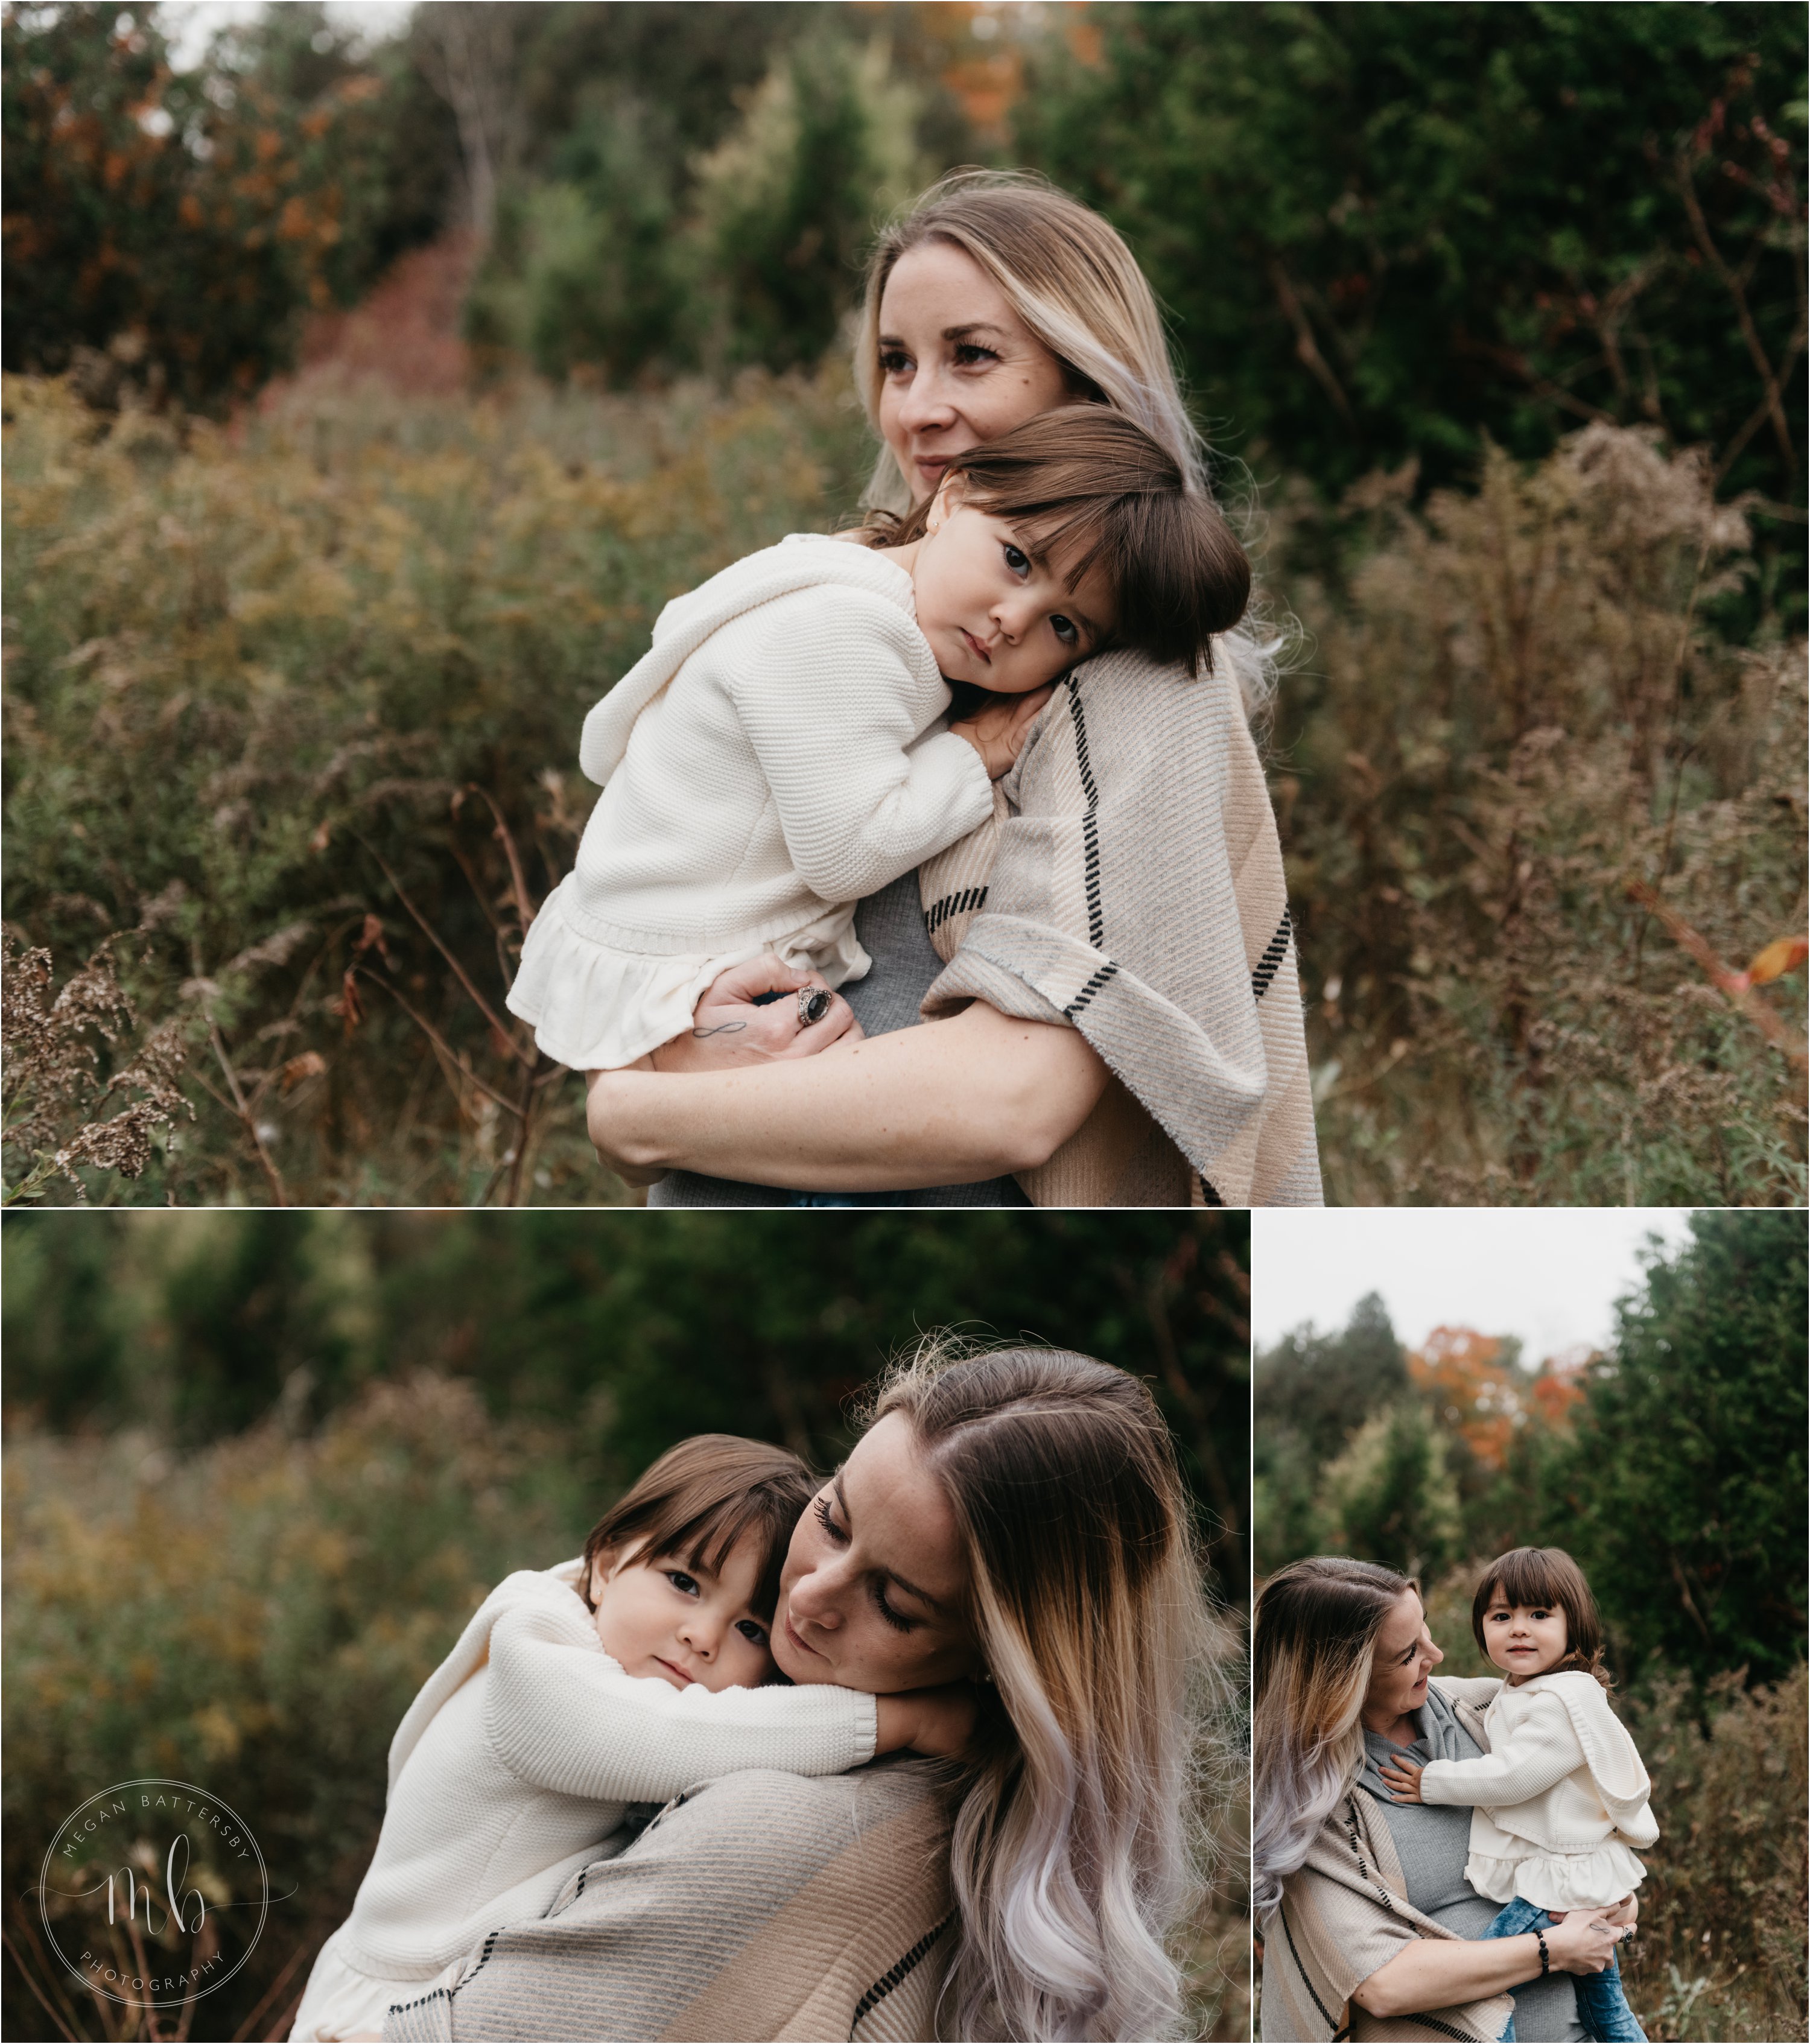 Young girl snuggling in to mom standing in field of tall grass